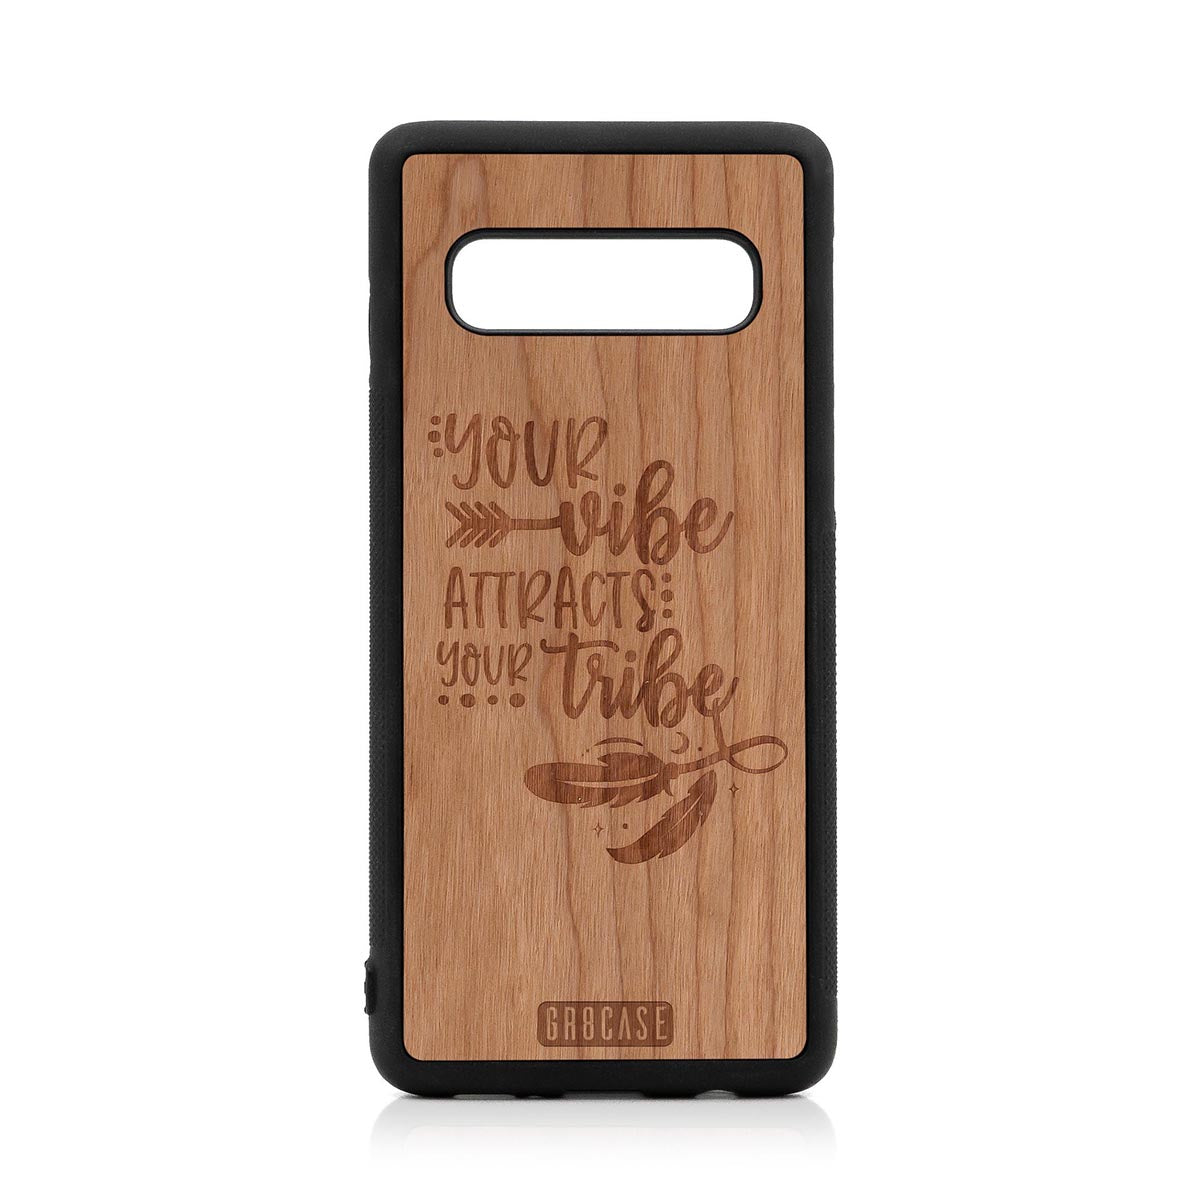 Your Vibe Attracts Your Tribe Design Wood Case For Samsung Galaxy S10